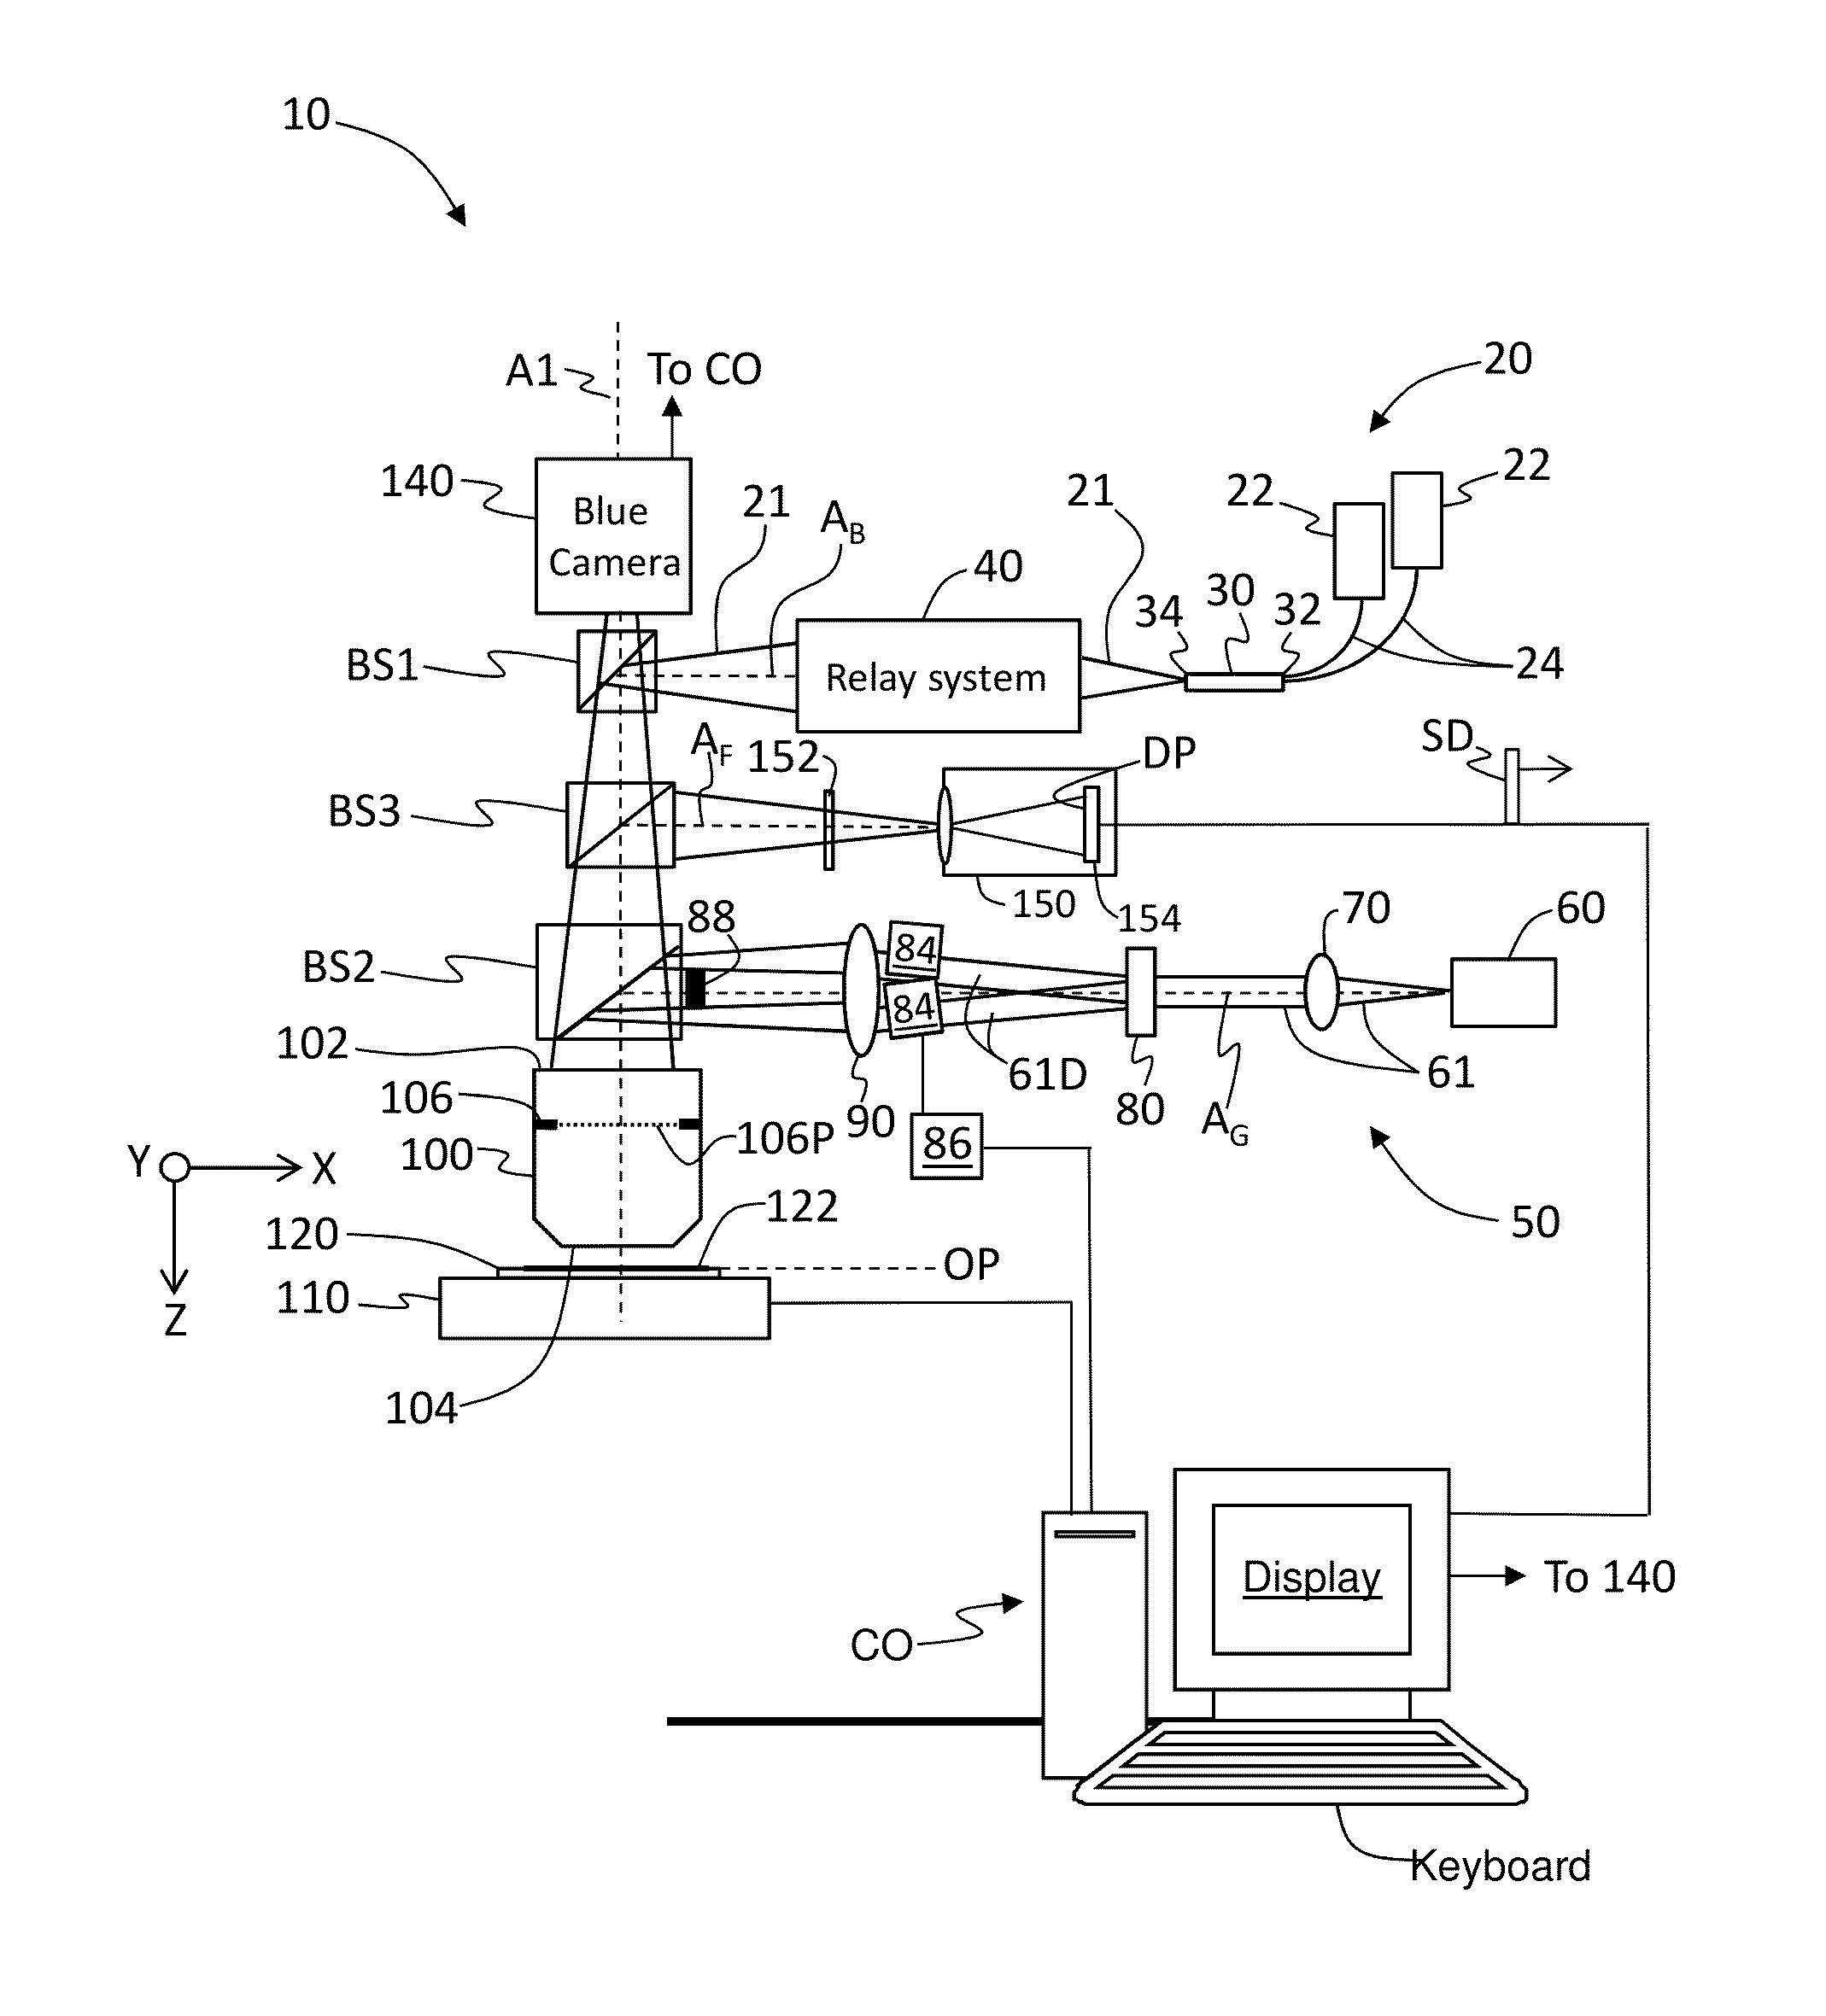 Apparatus and methods for microscopy having resolution beyond the Abbe limit